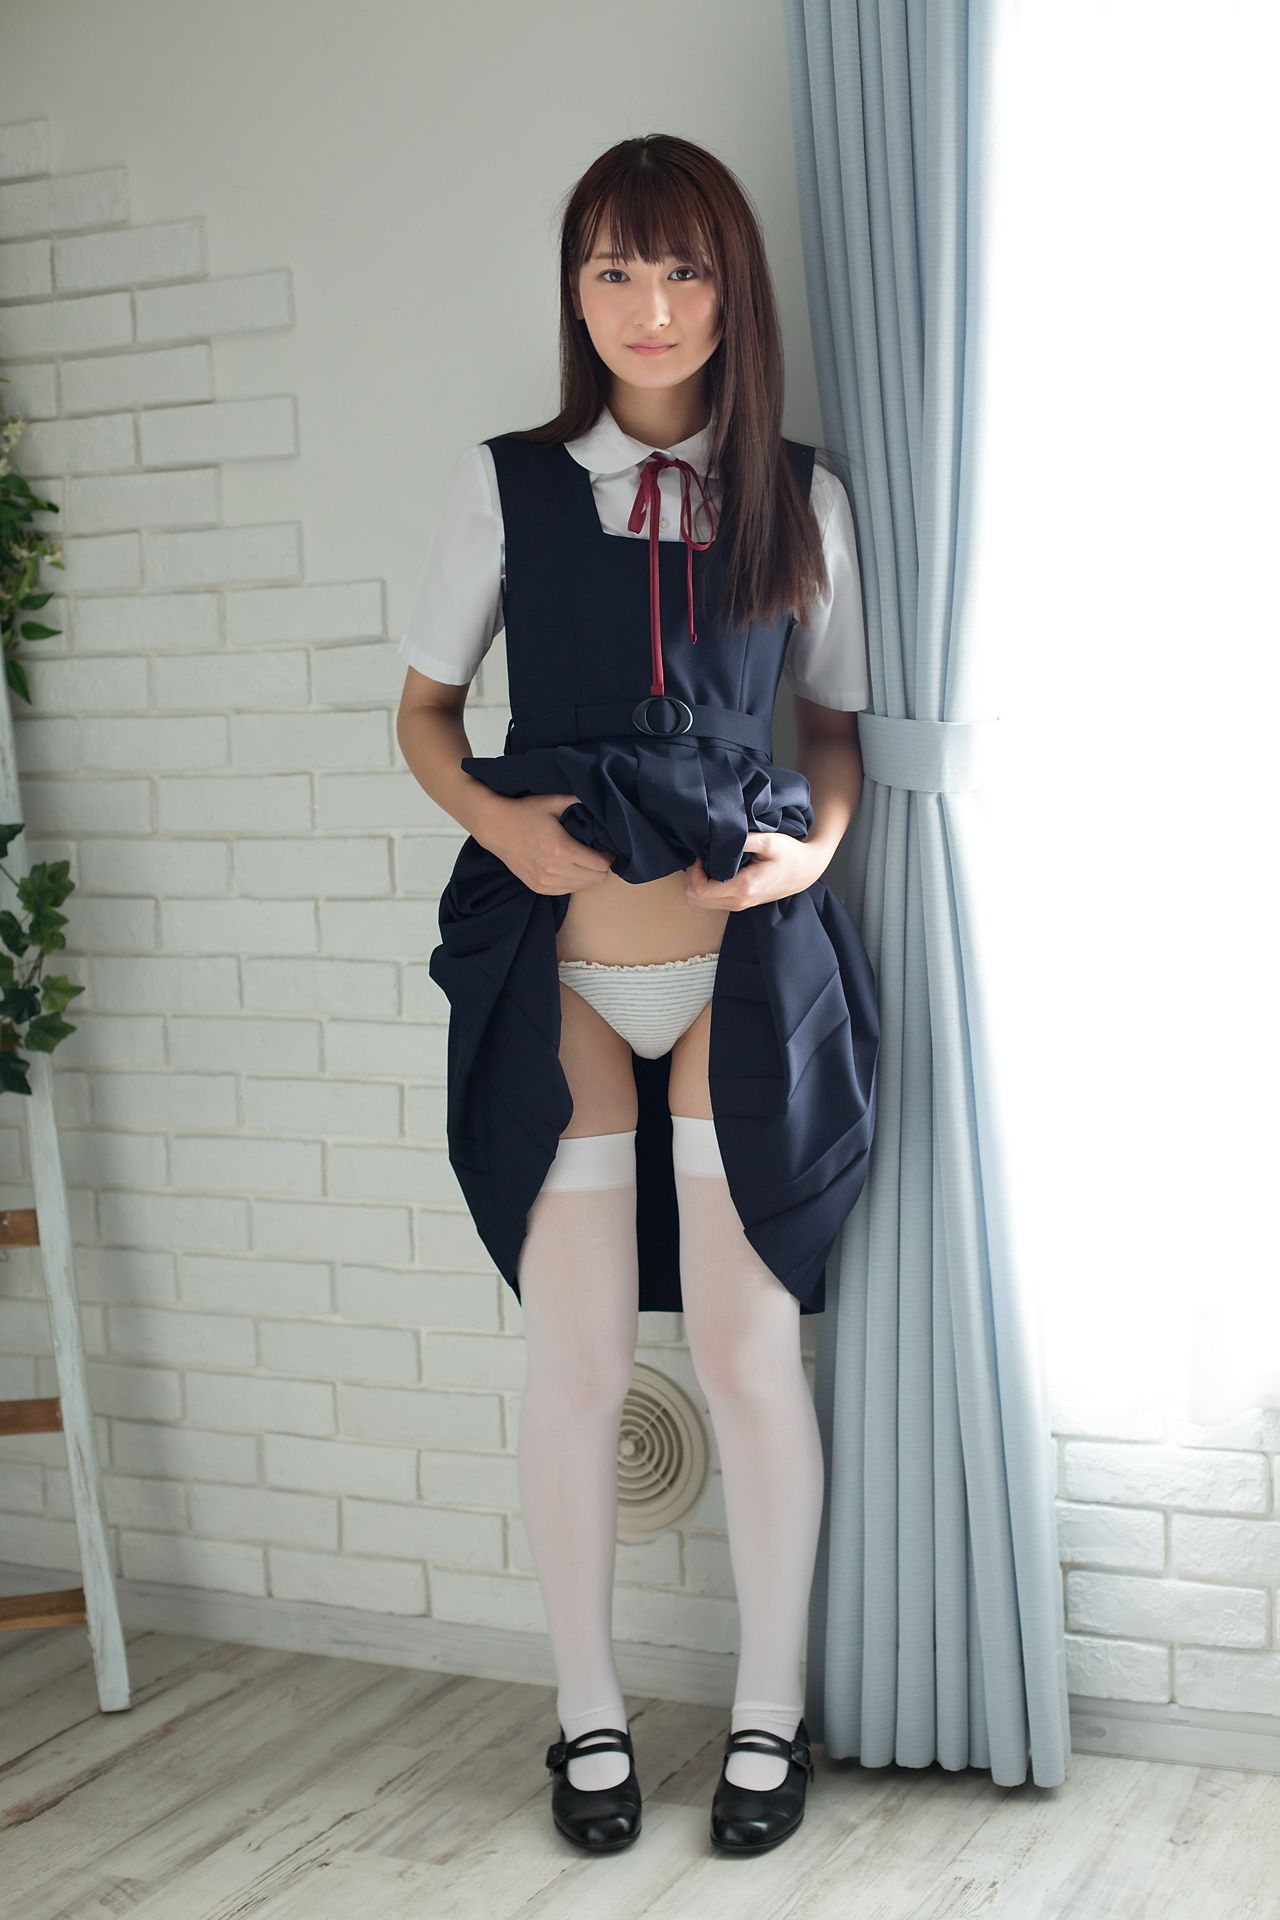 [Minisuka.tv] 近藤あさみ 白丝学生装 - Limited Gallery 18.1[33](第7页)